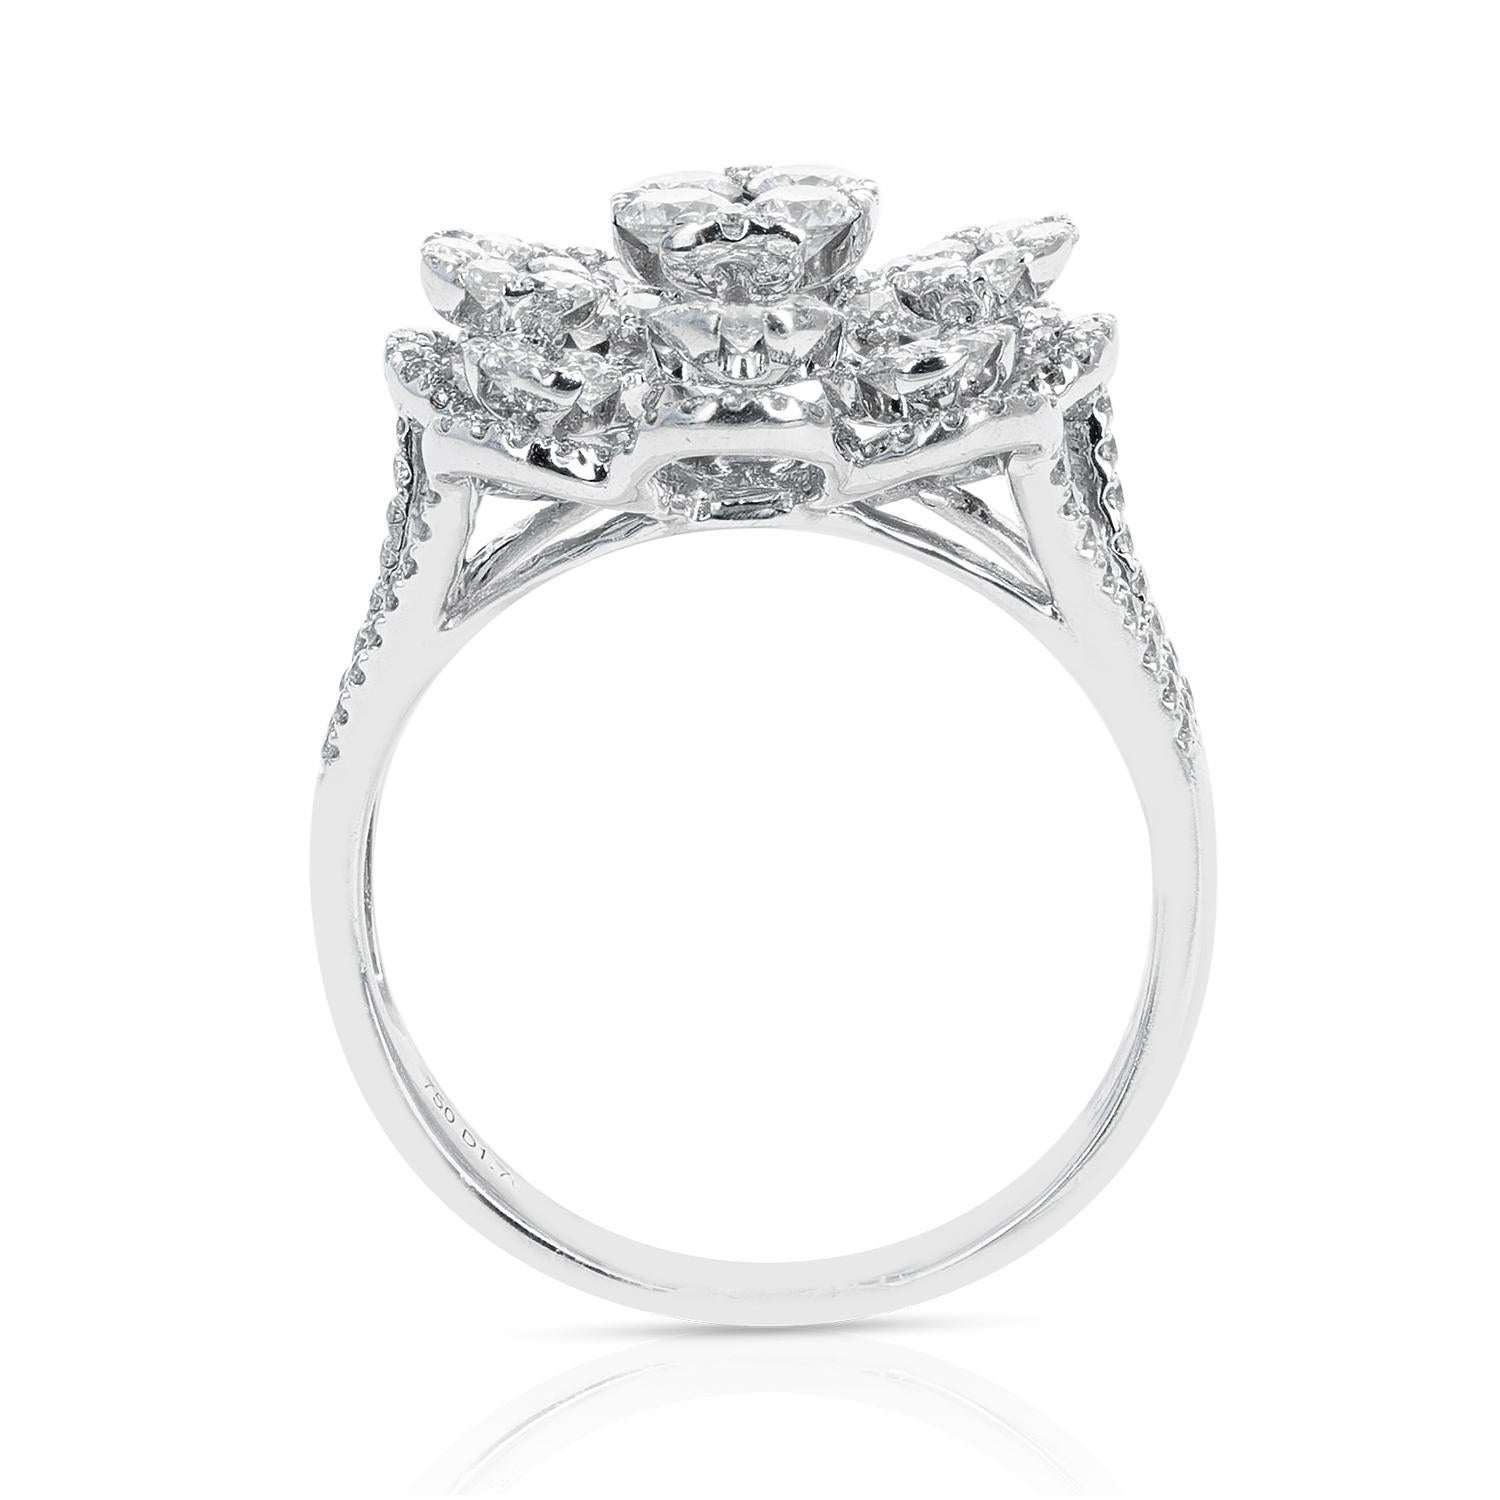 A Floral Round Diamond Cocktail Ring made in 18 Karat White Gold. The Diamonds weigh 1.70 carats, the color is approximately G/H, and the clarity is VS. Ring Size US 6.50. The total weight is 6.58 grams. 
 
 